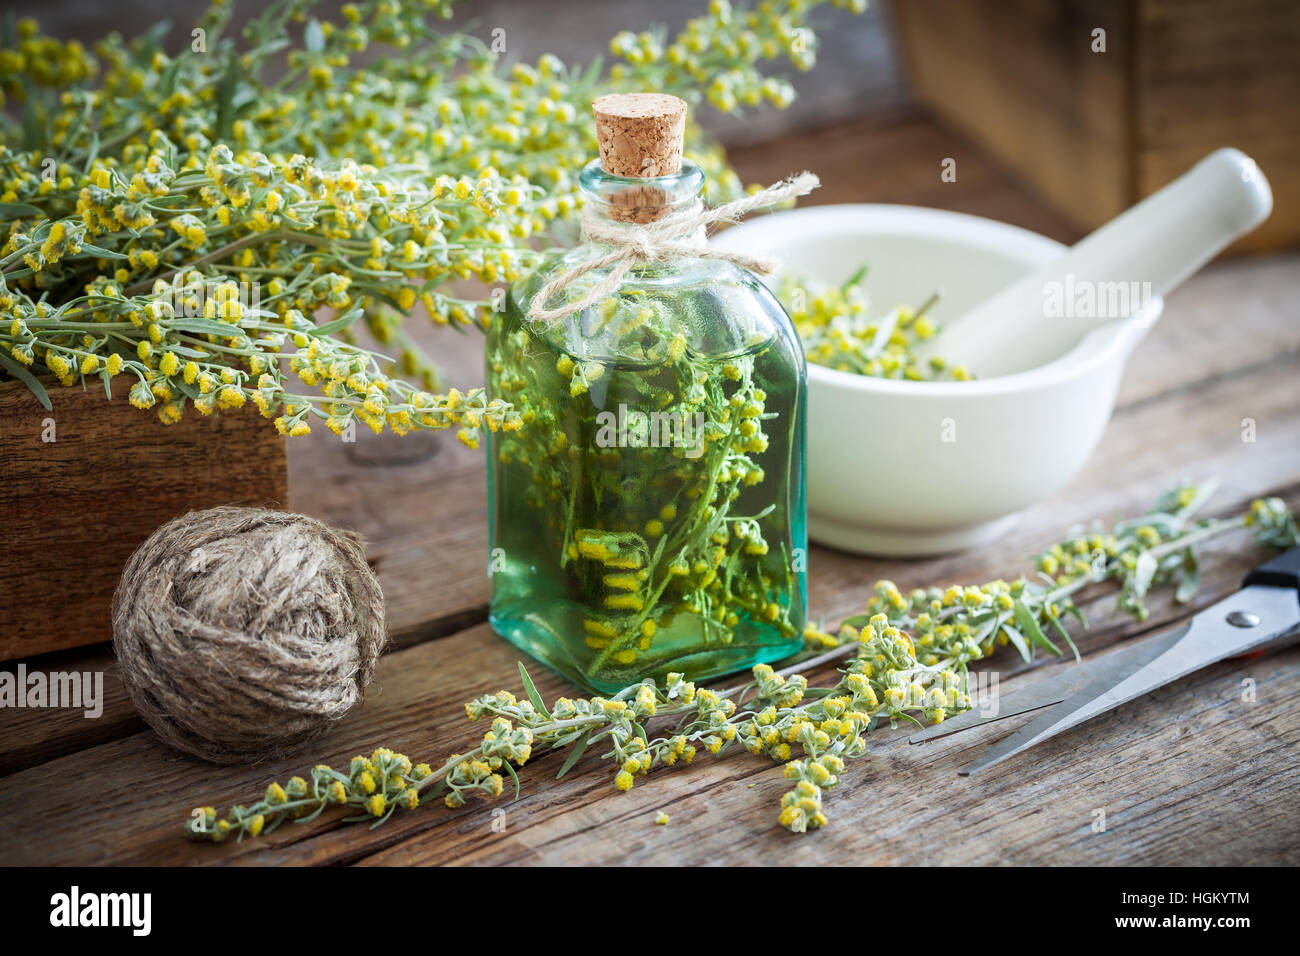 Bottle of absent or tincture of tarragon healthy herbs, absinthe healing herbs, scissors and mortar. Herbal medicine. Stock Photo